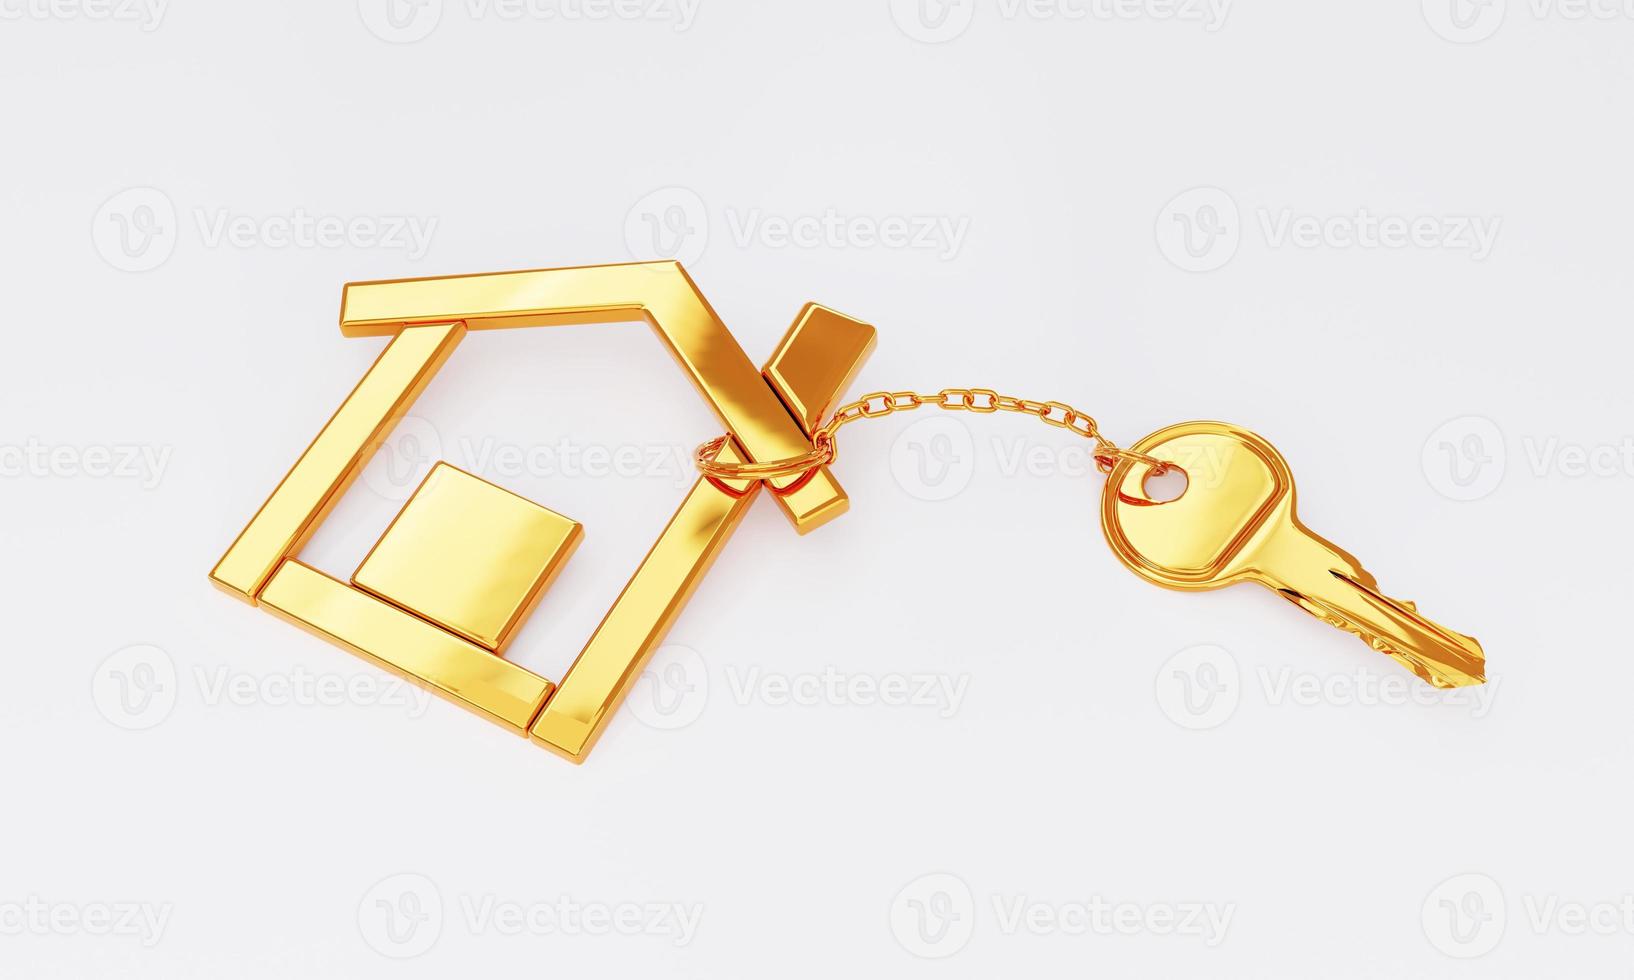 Gold key chain with golden modern house shape key holder on white background. Business construction and architecture concept. 3D illustration rendering photo